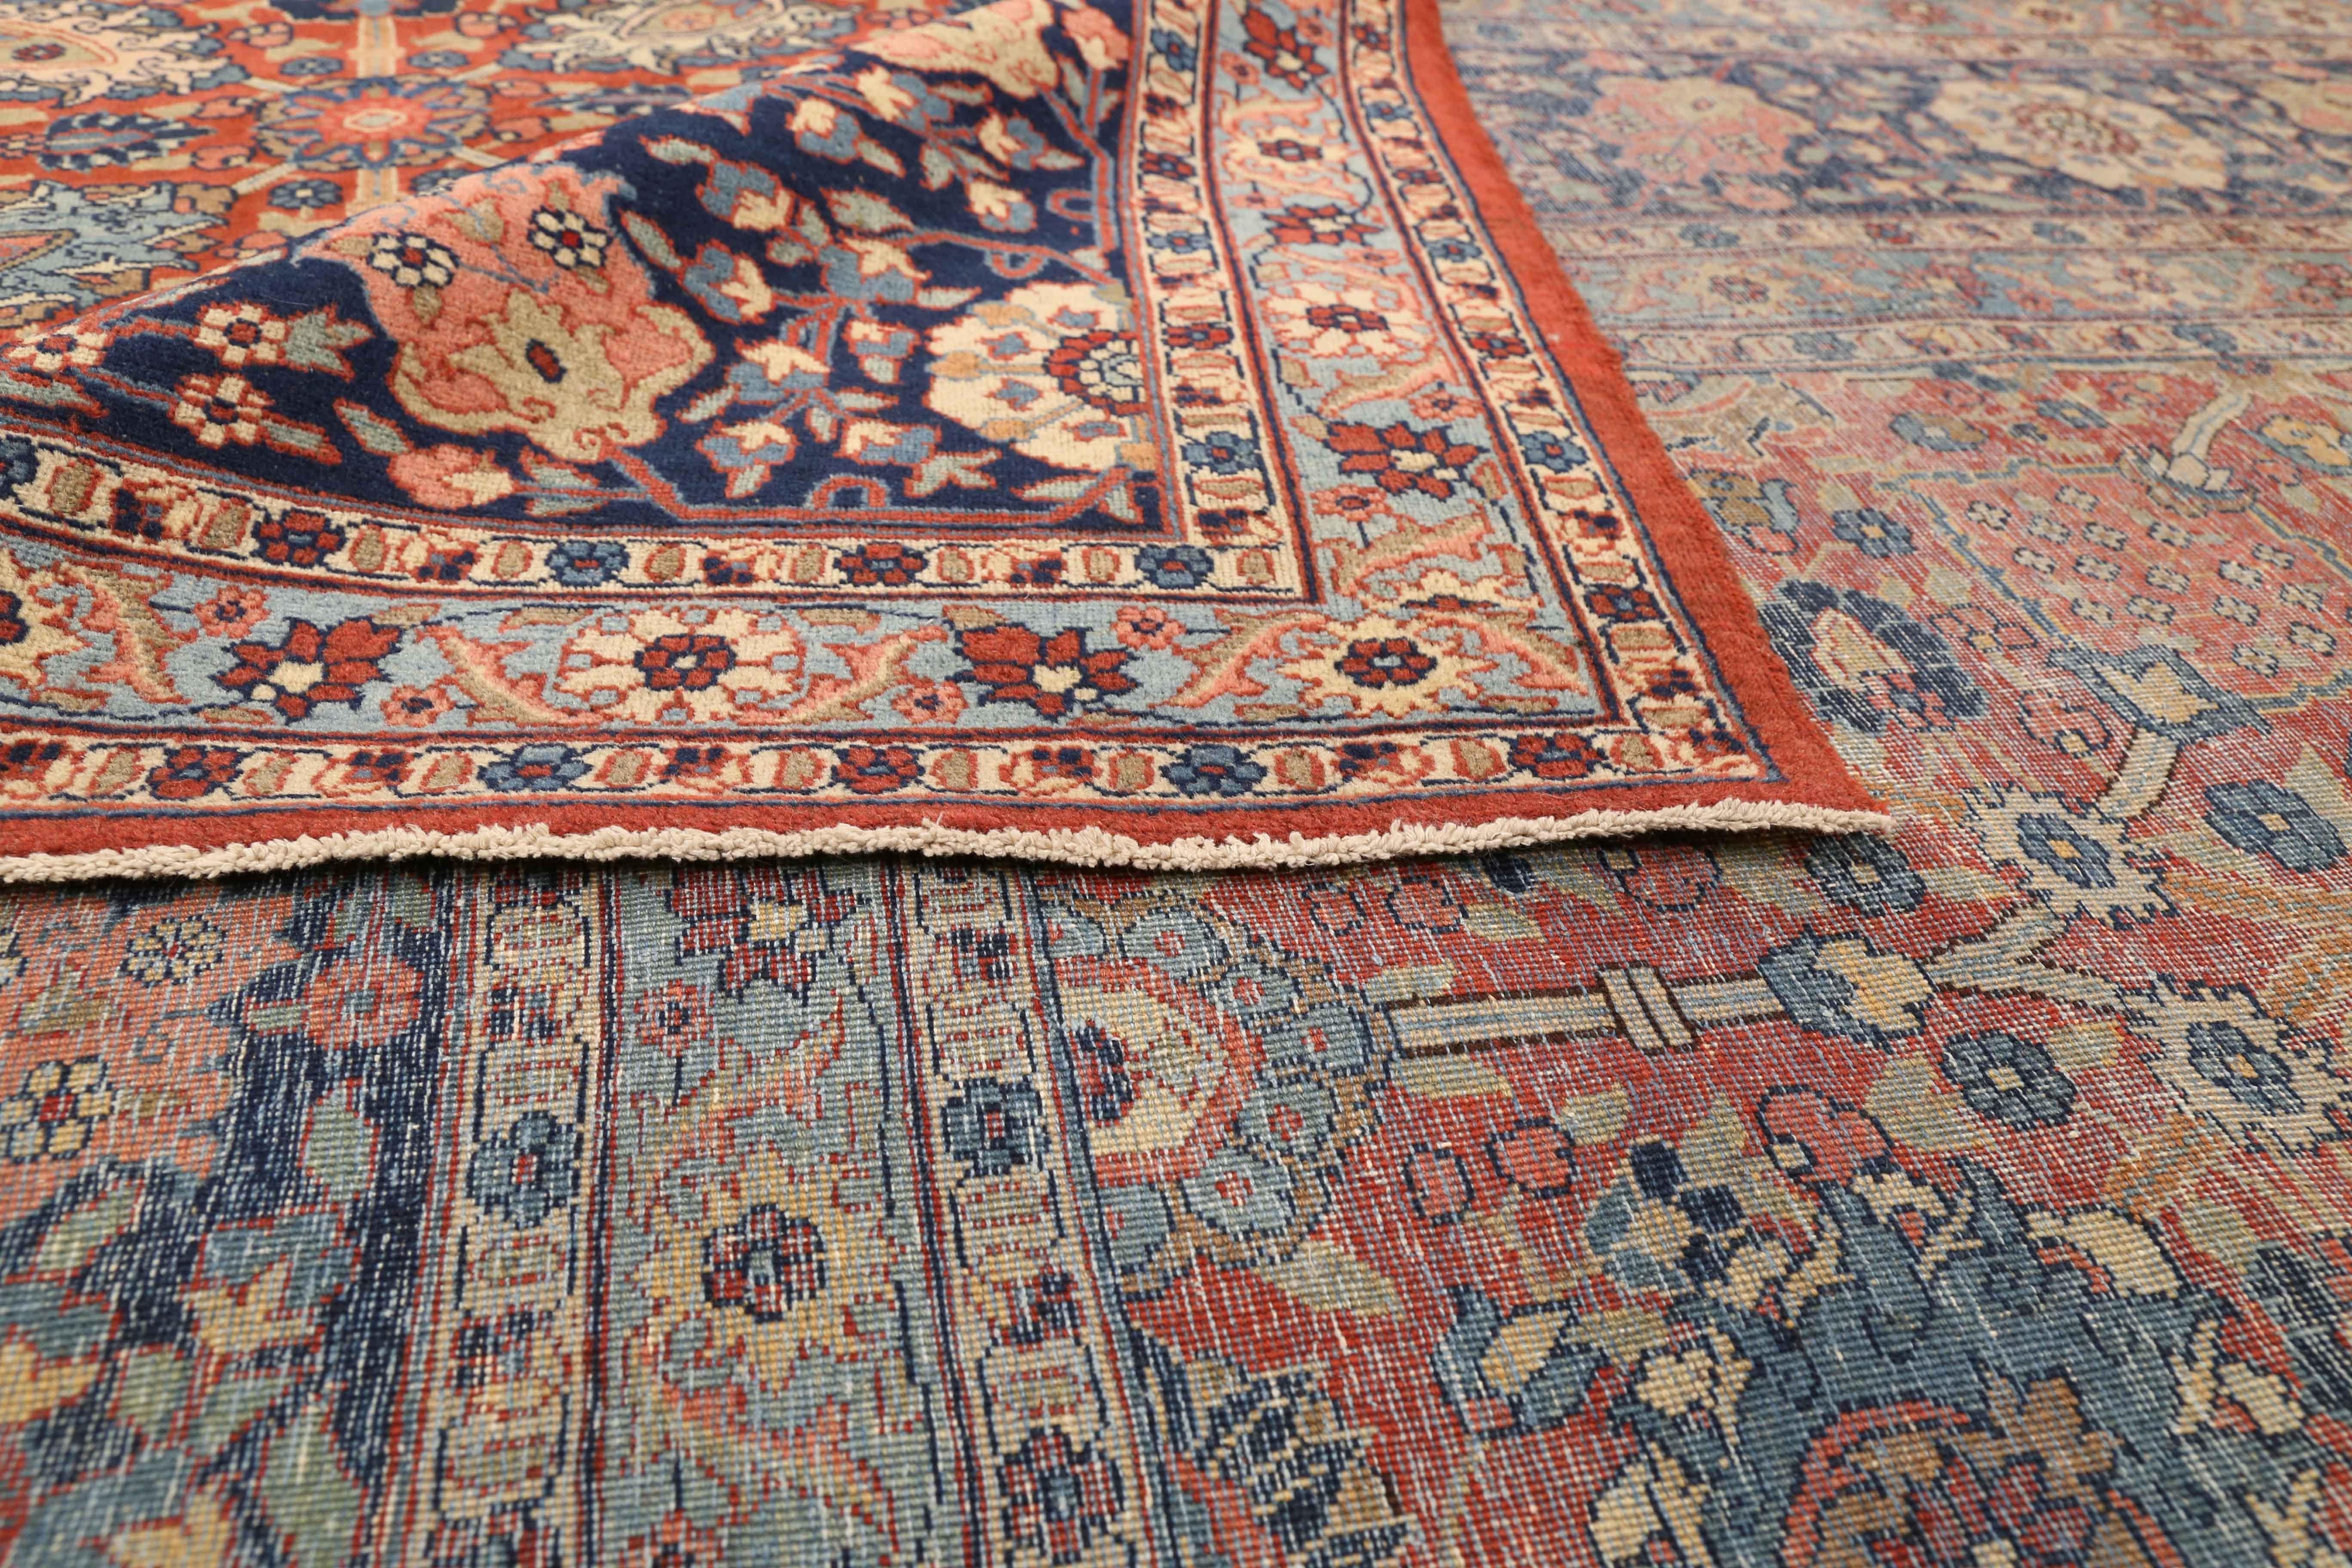 Antique Persian rug handmade in the 1940s. Weavers used fine and exquisite wool colored with rich all-organic vegetable dyes. It shows a traditional style rooted in the Classic designs of world-famous Safavid carpets that were created infamous rug